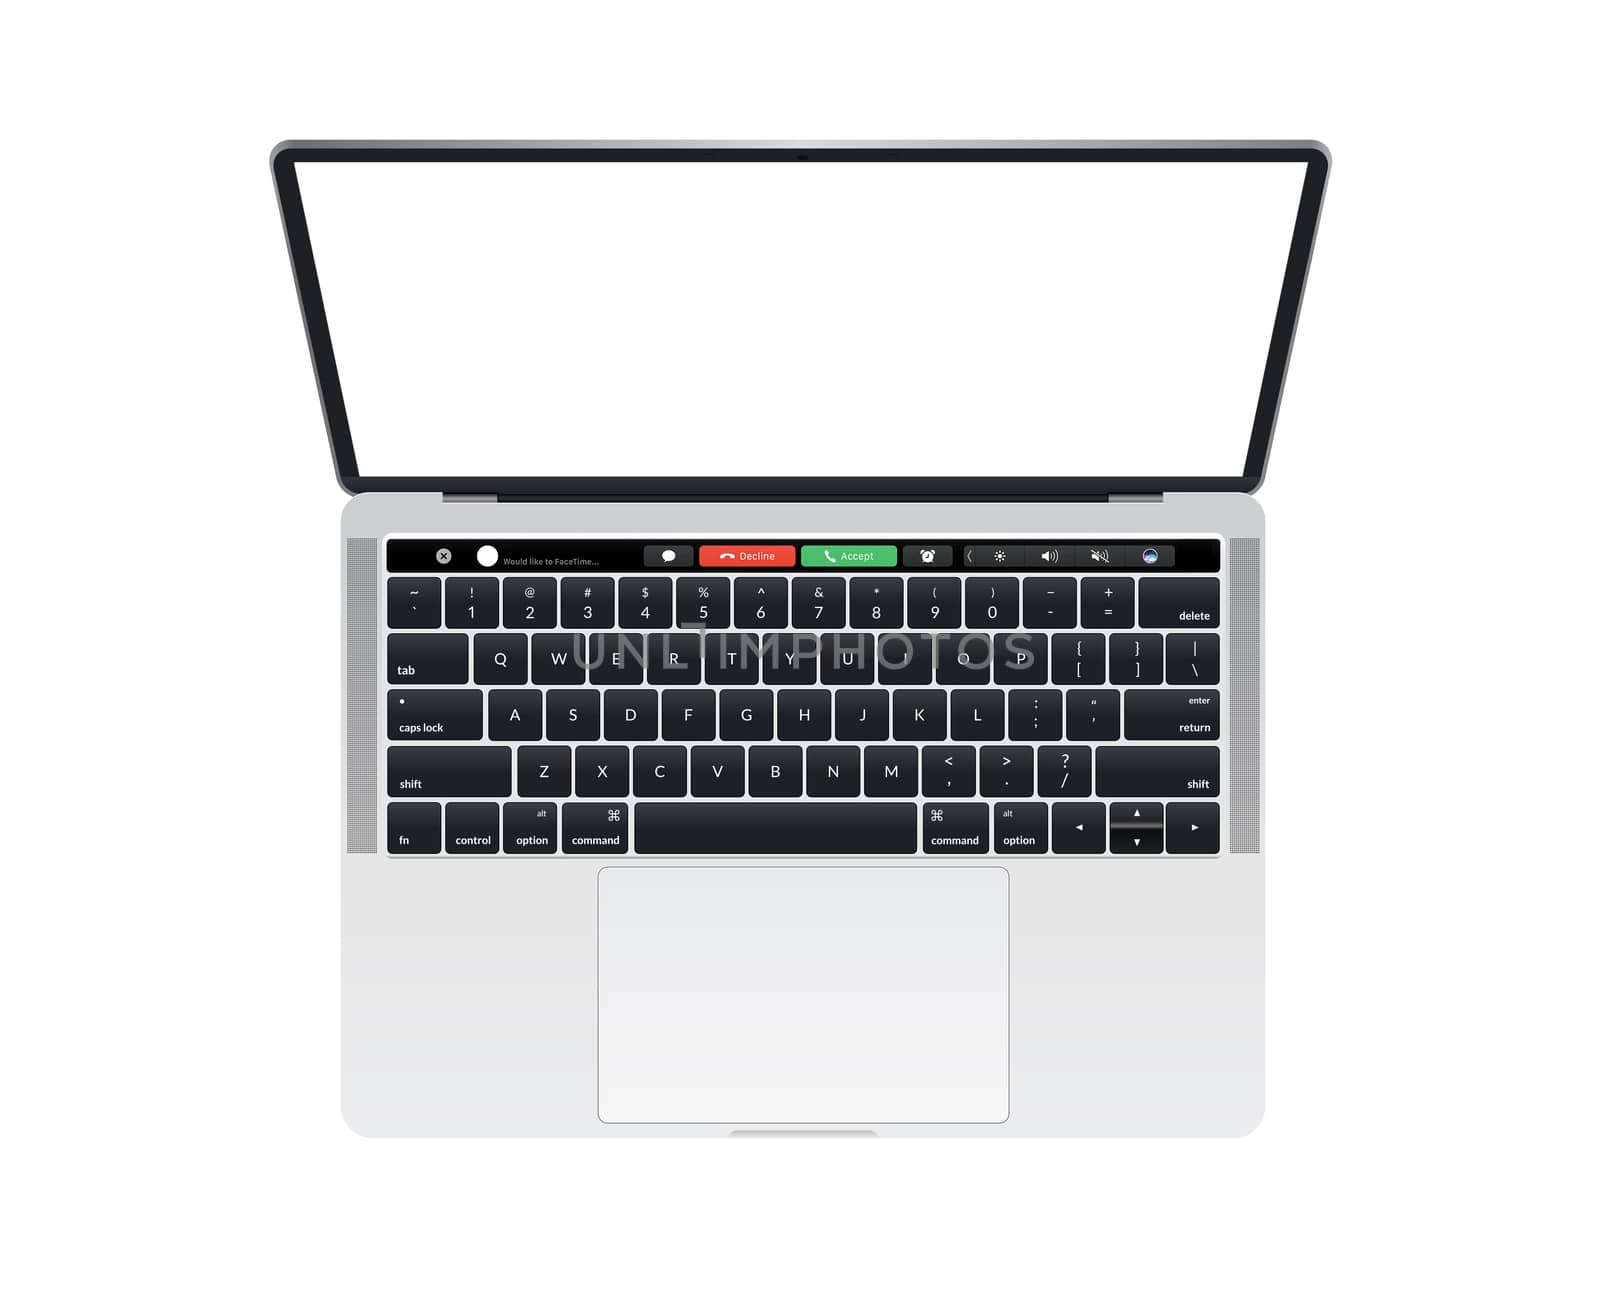 The isolated silver laptop computer with keyboard mockup on white background with touch bar phone key